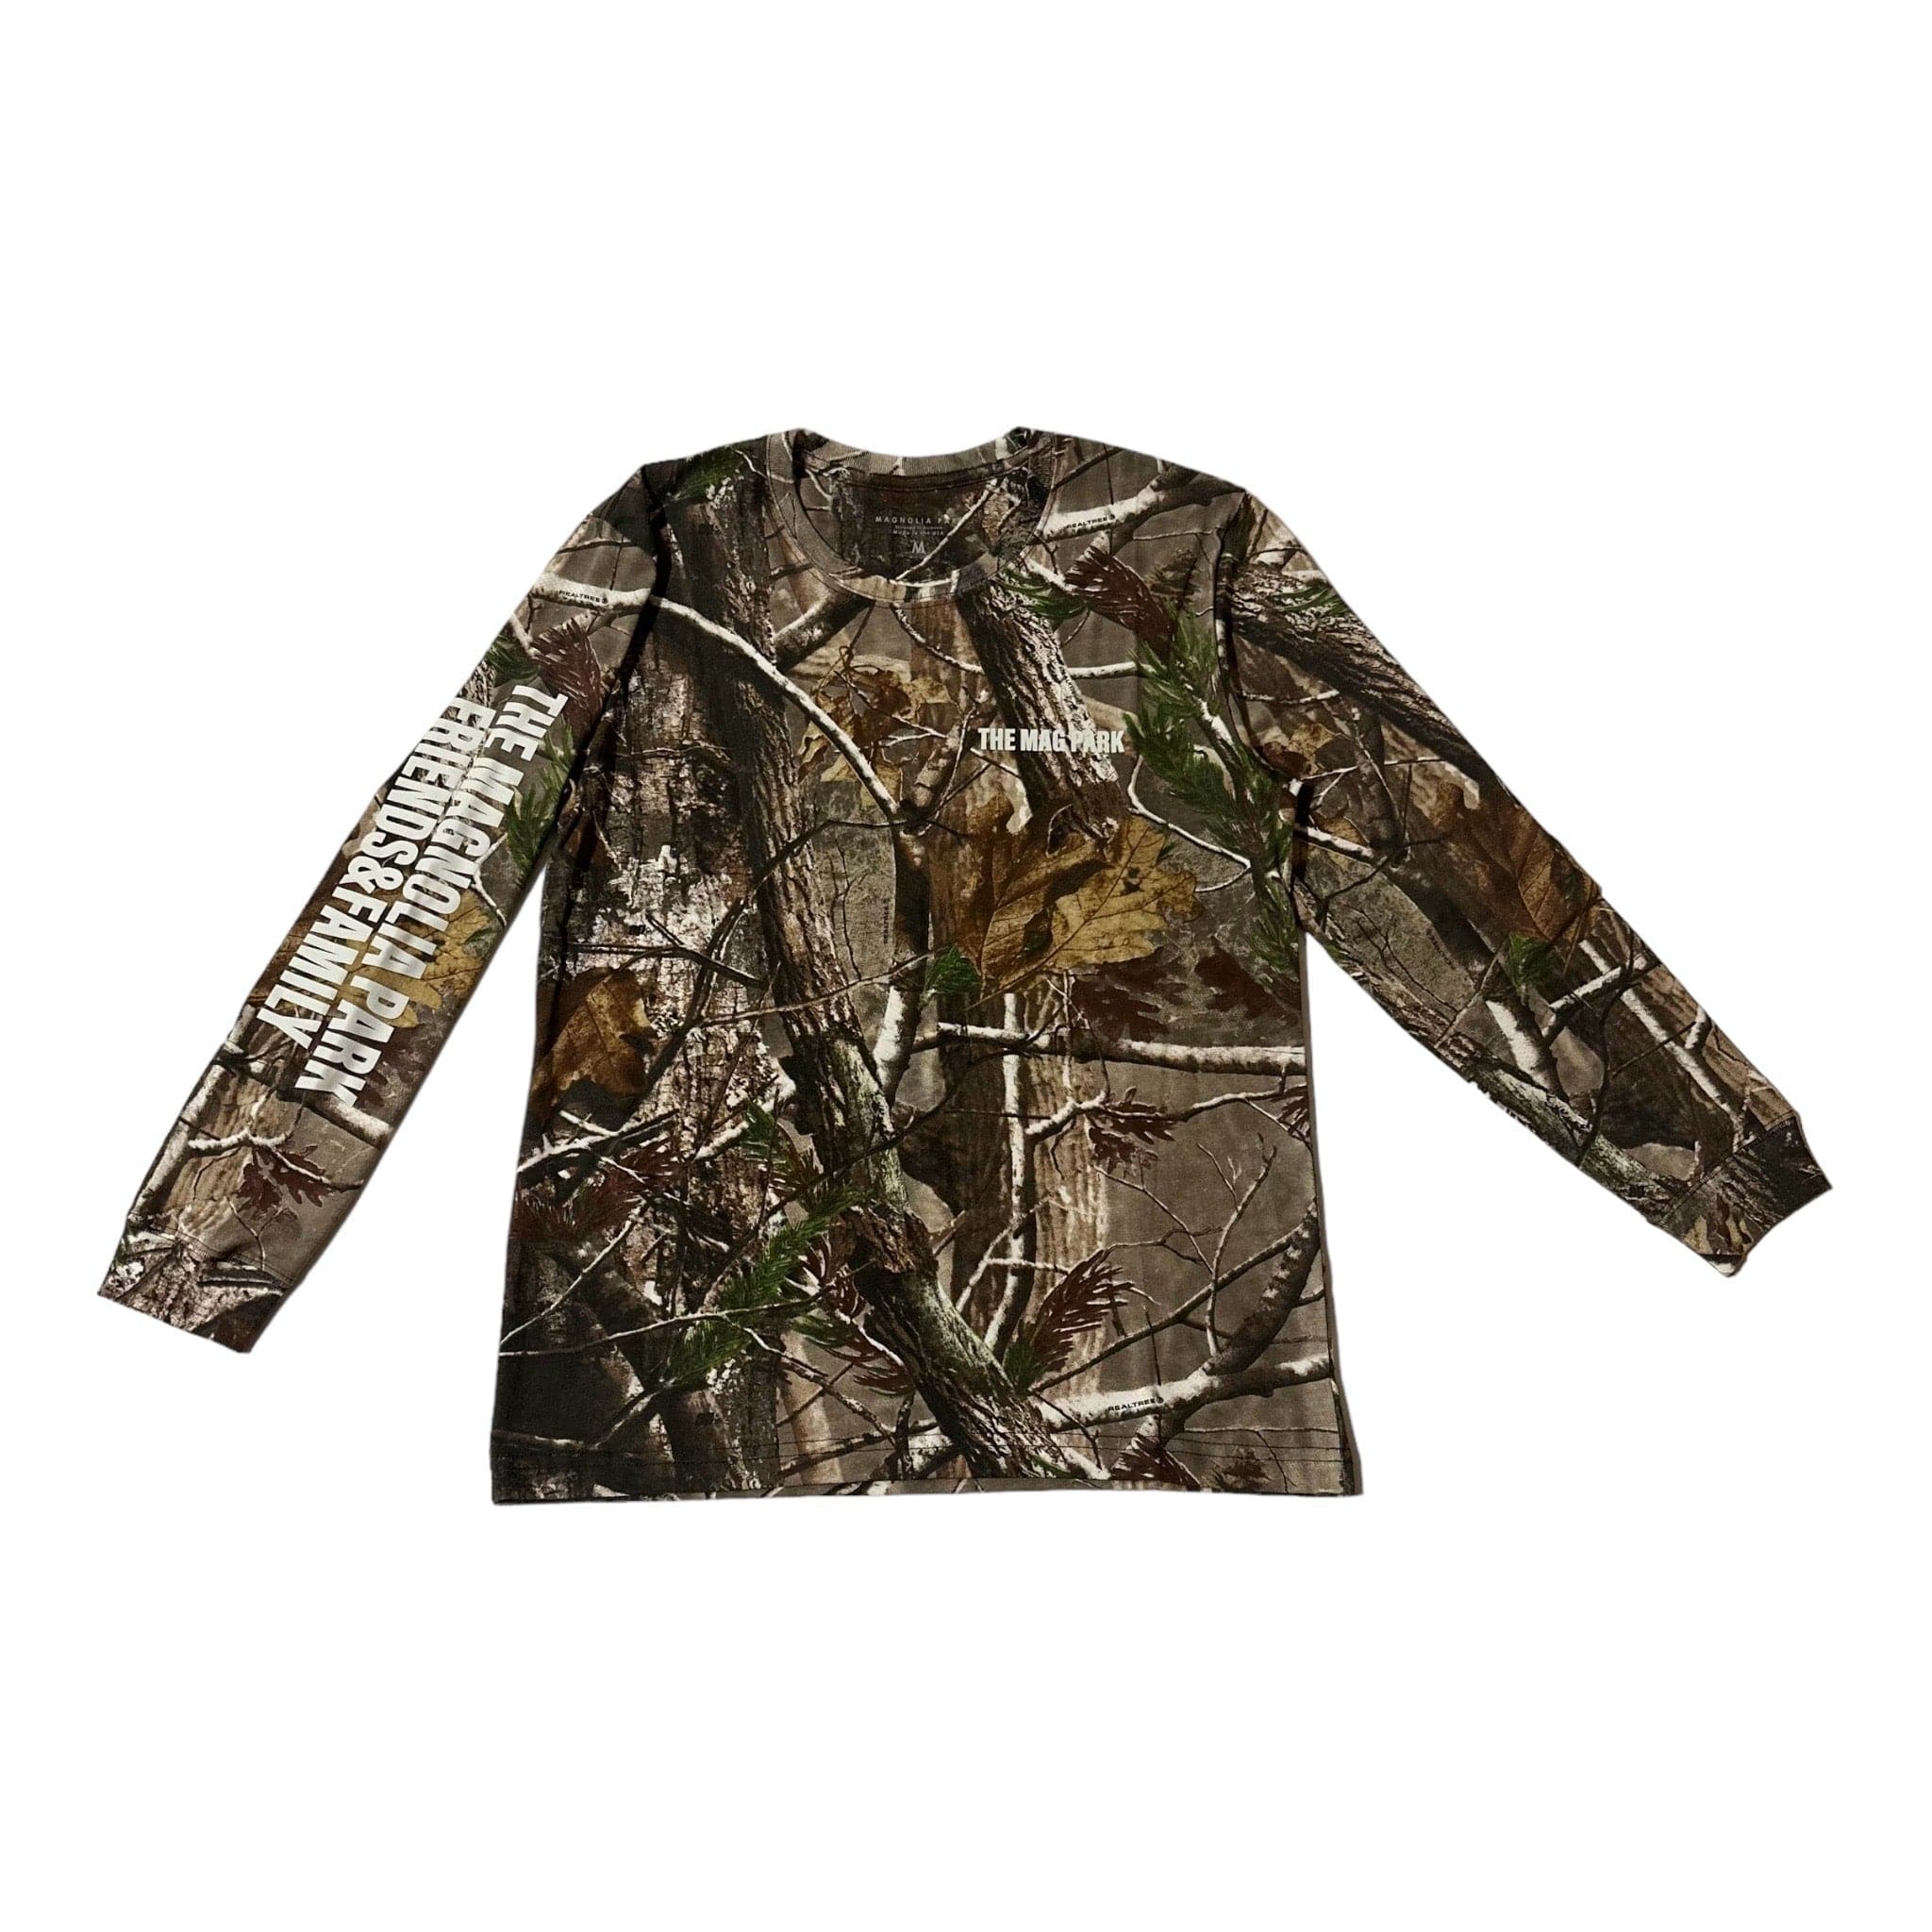 THE MAGNOLIA PARK - REALTREE F&F L/S TEE [NFT HOLDERS ONLY] - The Magnolia Park